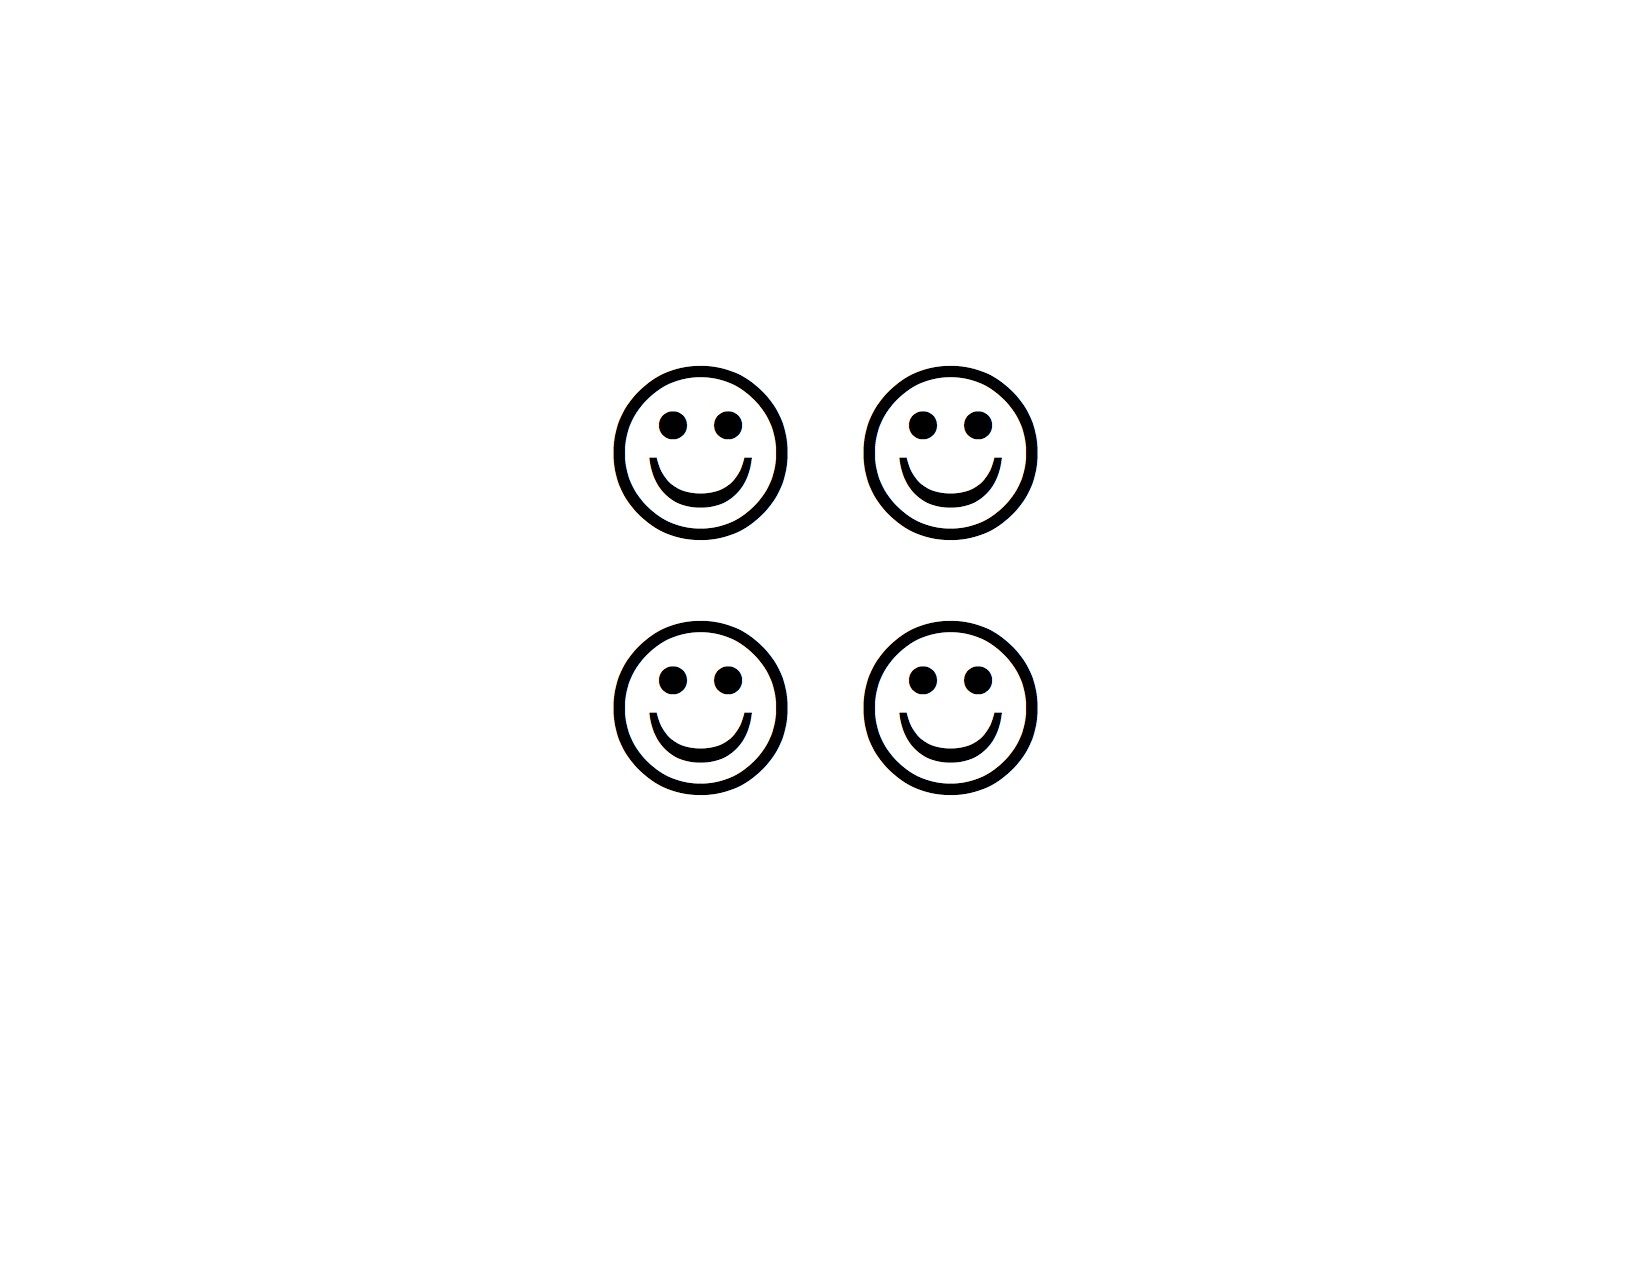 Four smiley faces arranged in two rows of two.